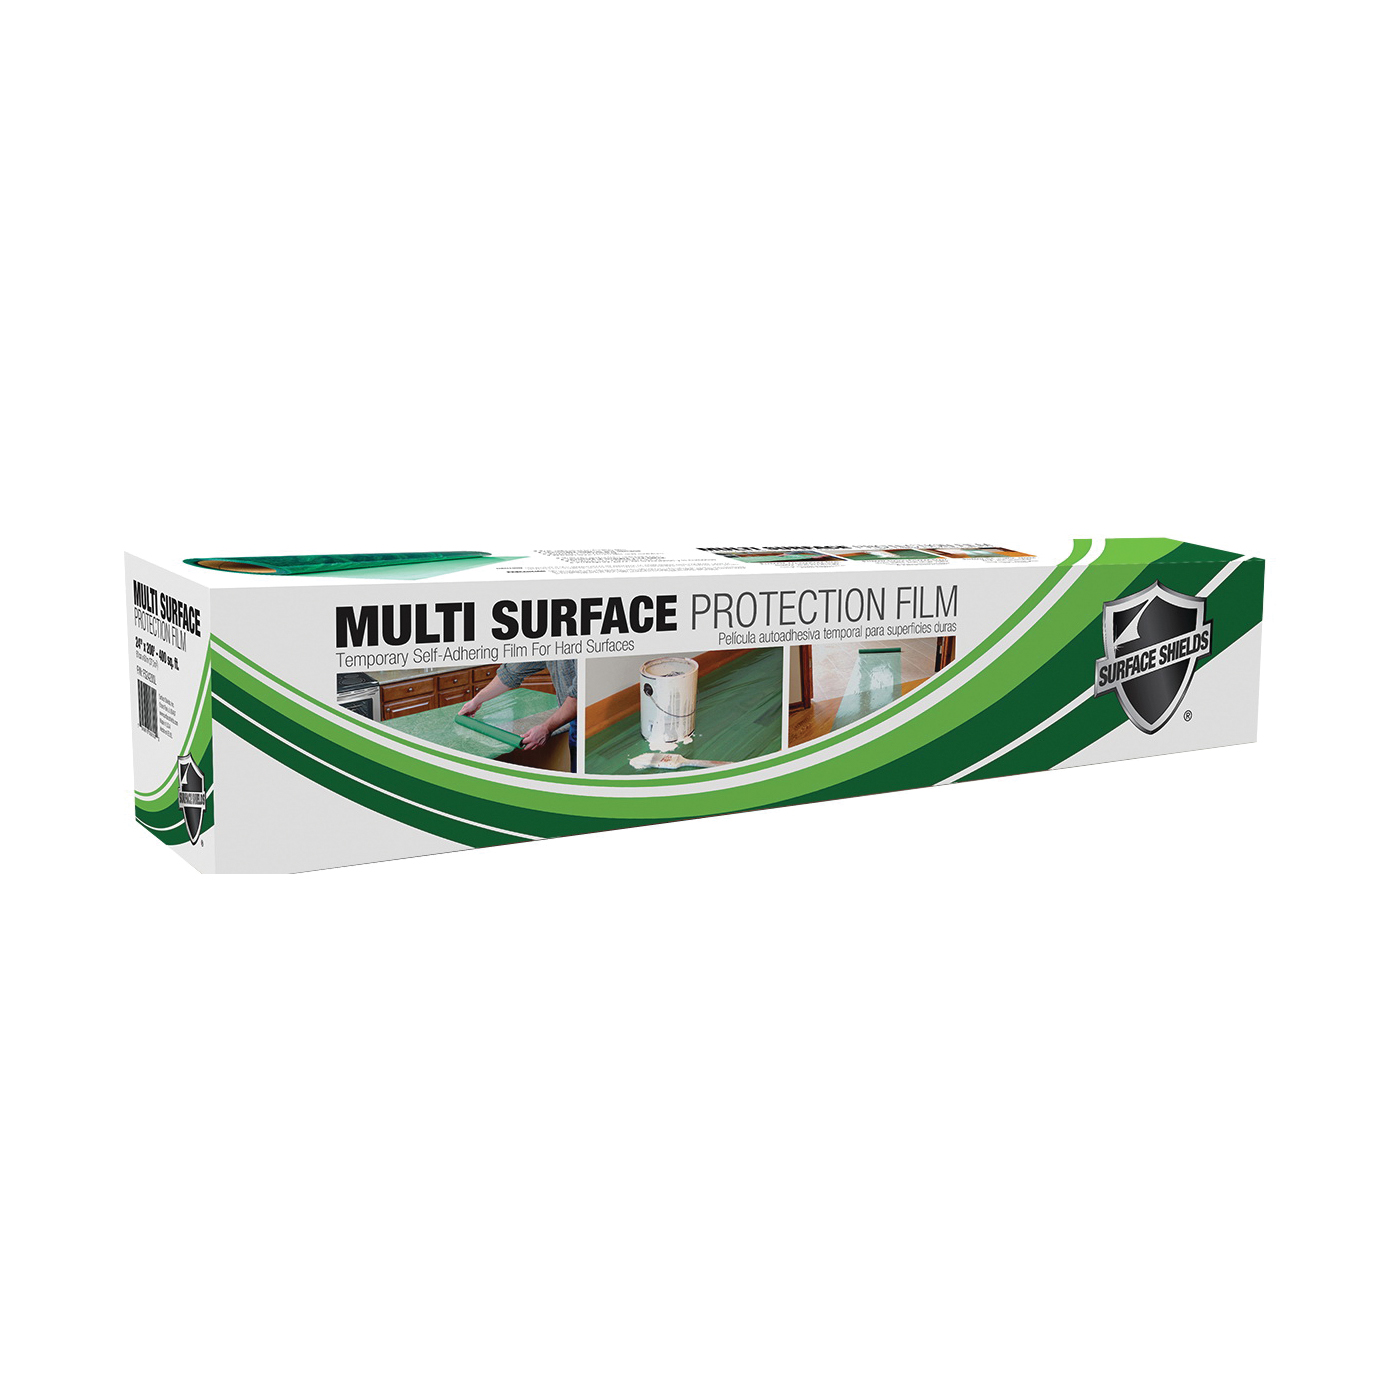 Surface Shields MU2450W Protection Film, 50 ft L, 24 in W, 3 mil Thick, Polyethylene, Green - 1